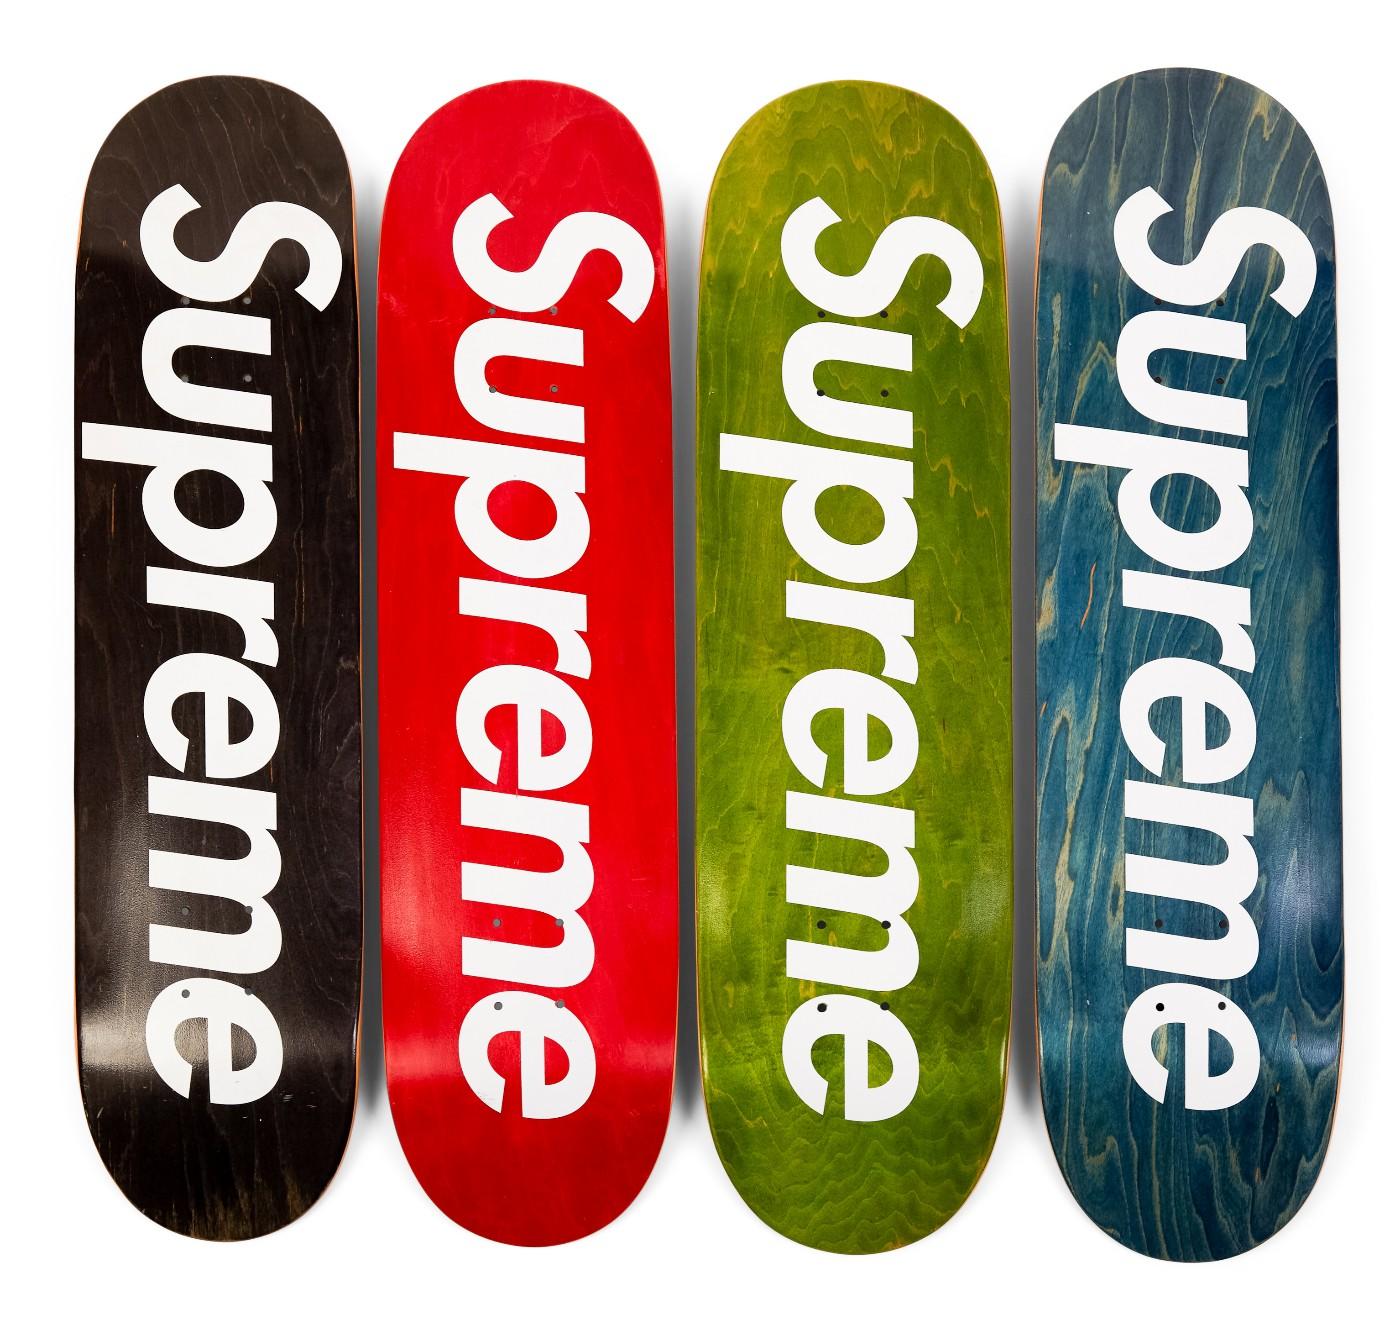 Sotheby's to Auction Complete Archive of Supreme Skate Decks | Art & Object